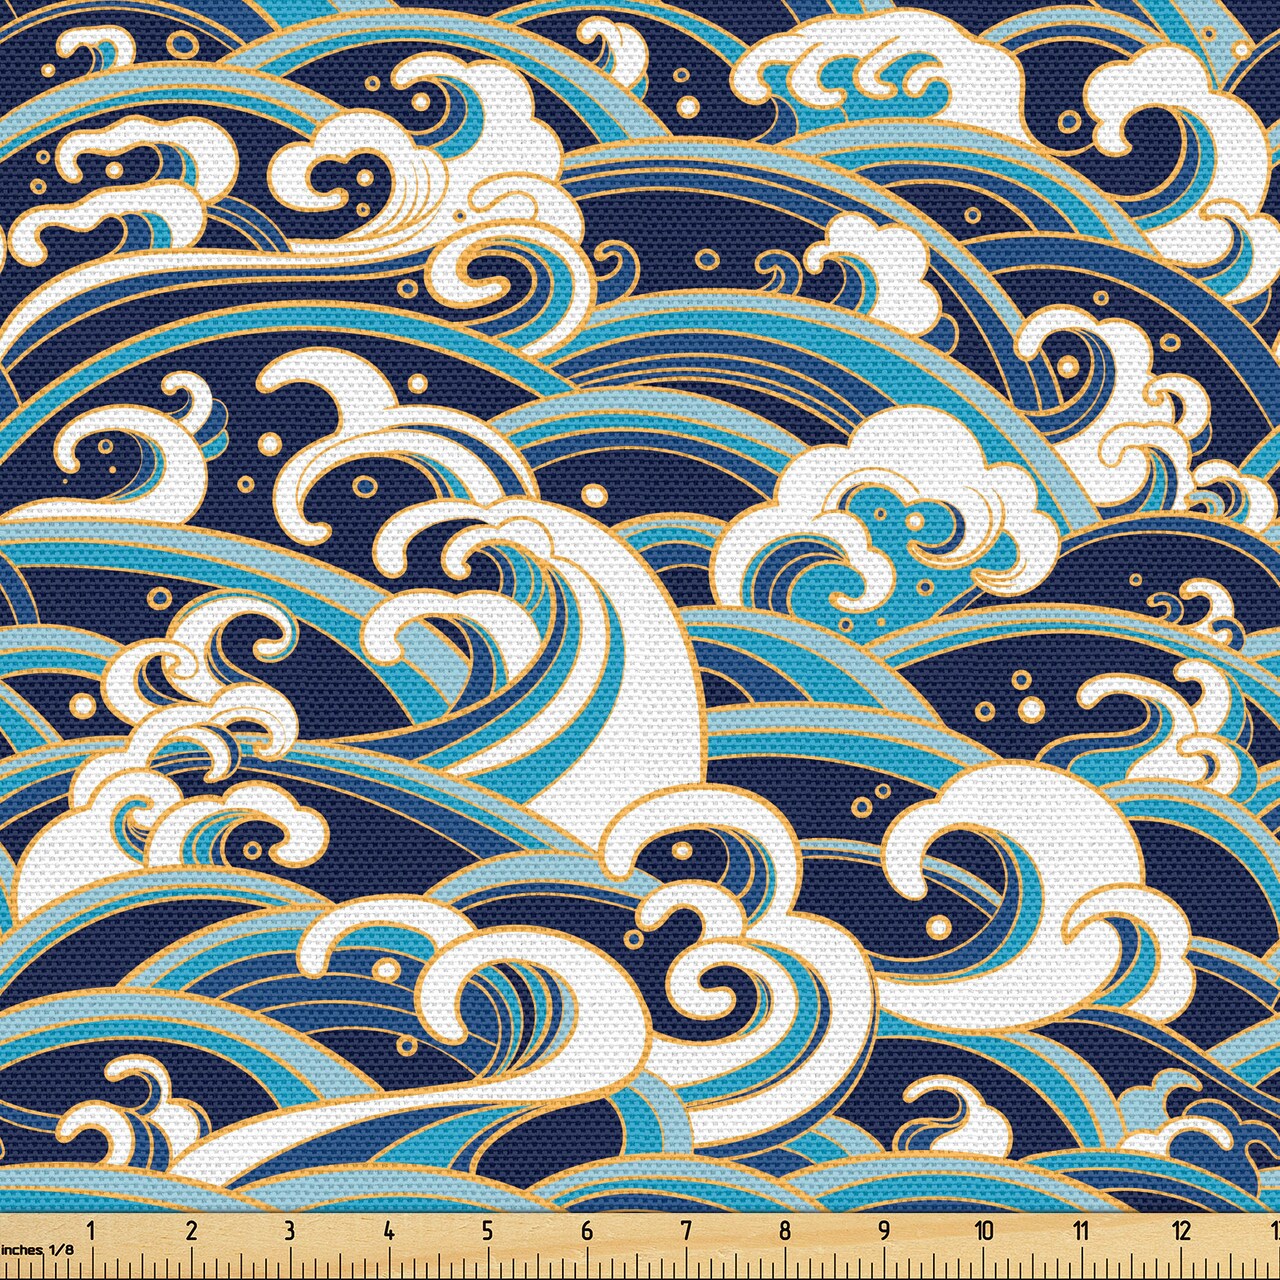 Ambesonne Nautical Fabric by the Yard, Traditional Oriental Style Ocean Waves Pattern Foam and Splashes Print, Decorative Fabric for Upholstery and Home Accents, 1 Yard, Blue and White